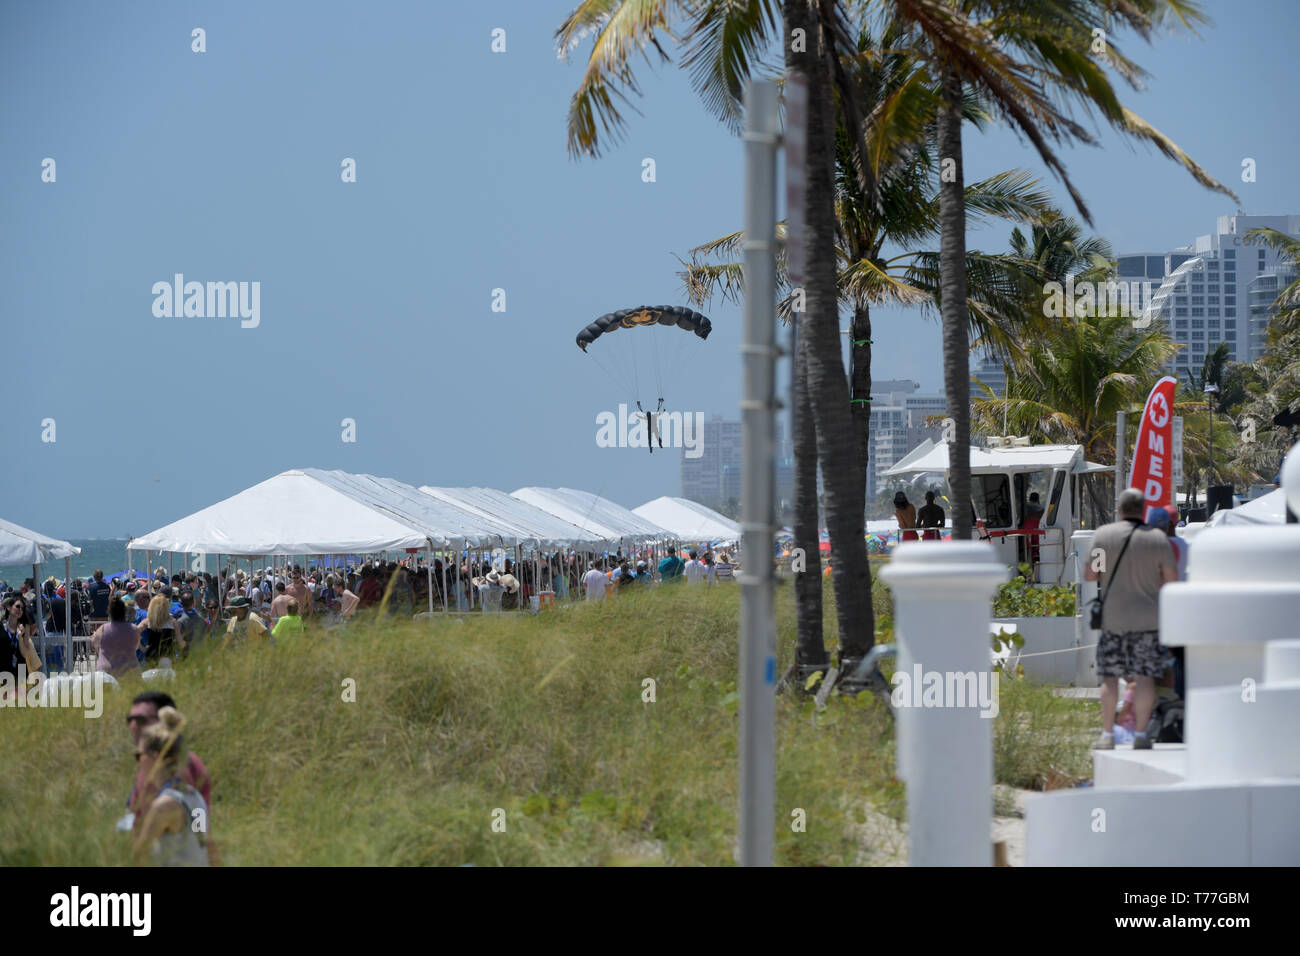 Florida, USA. 04th May, 2019. SOCOM Para-Commandos performs in the Fort Lauderdale Air Show on May 4, 2019 in Fort Lauderdale, Florida   People:  SOCOM Para-Commandos Credit: Storms Media Group/Alamy Live News Stock Photo